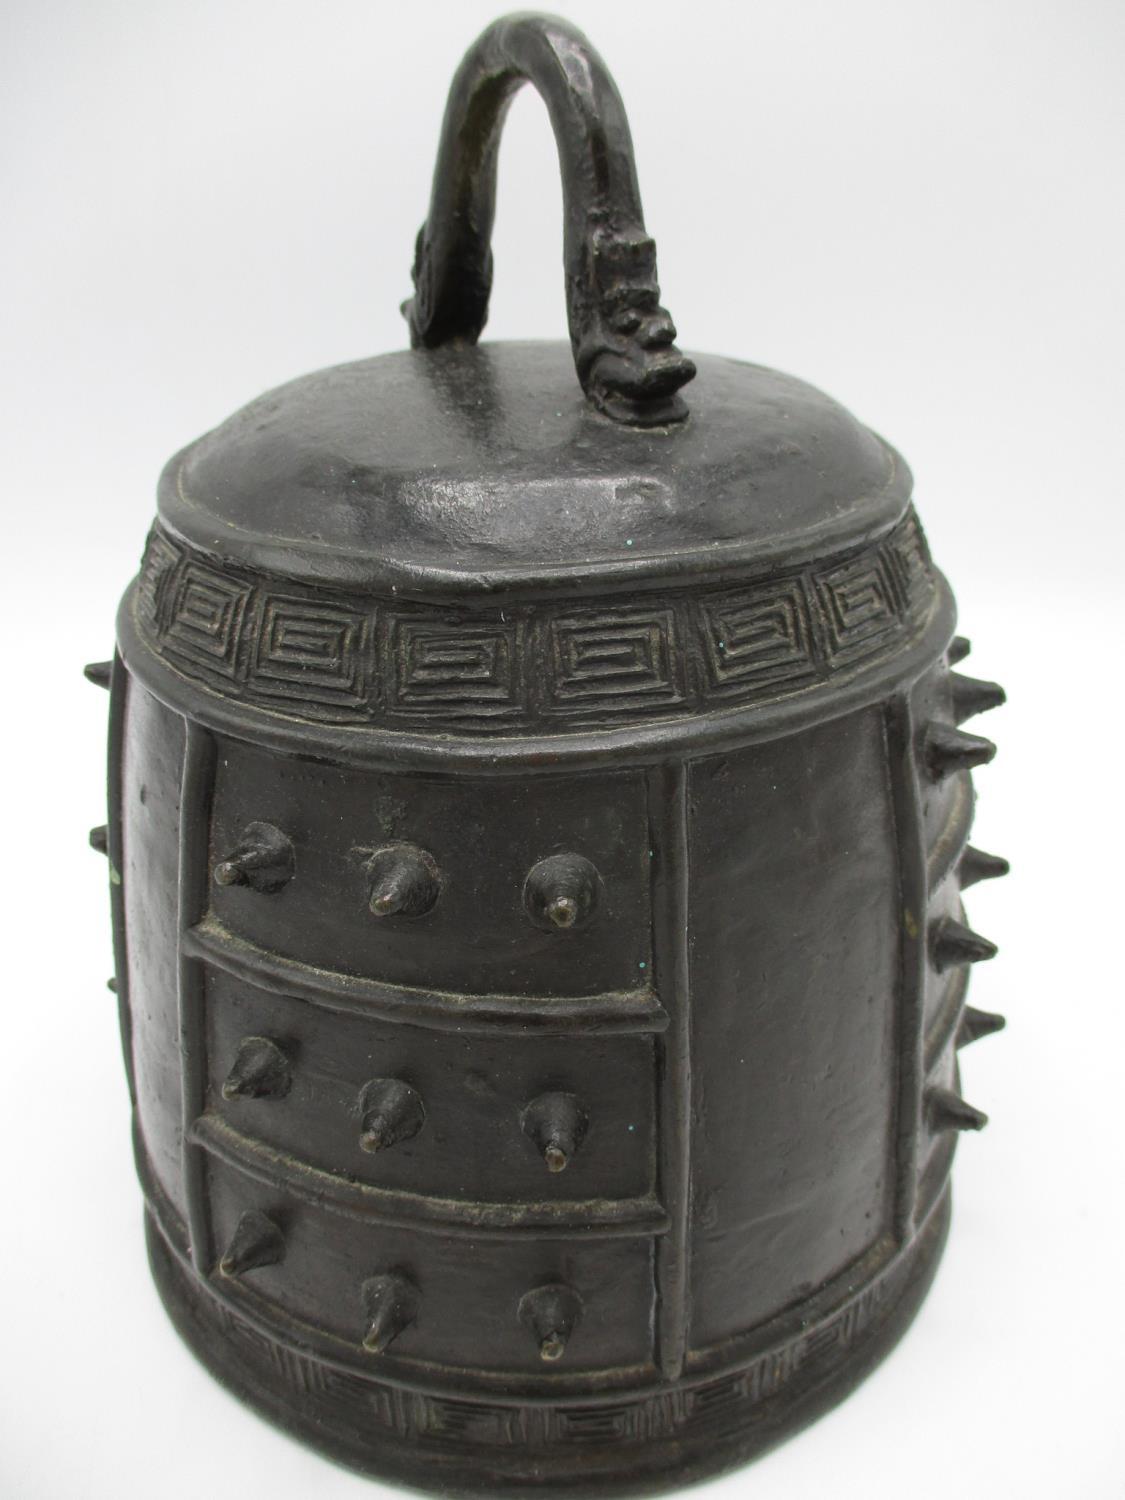 A Qing Dynasty Chinese bronze Bianzhong or chime bell with a twin mask handle, panels of - Image 2 of 7